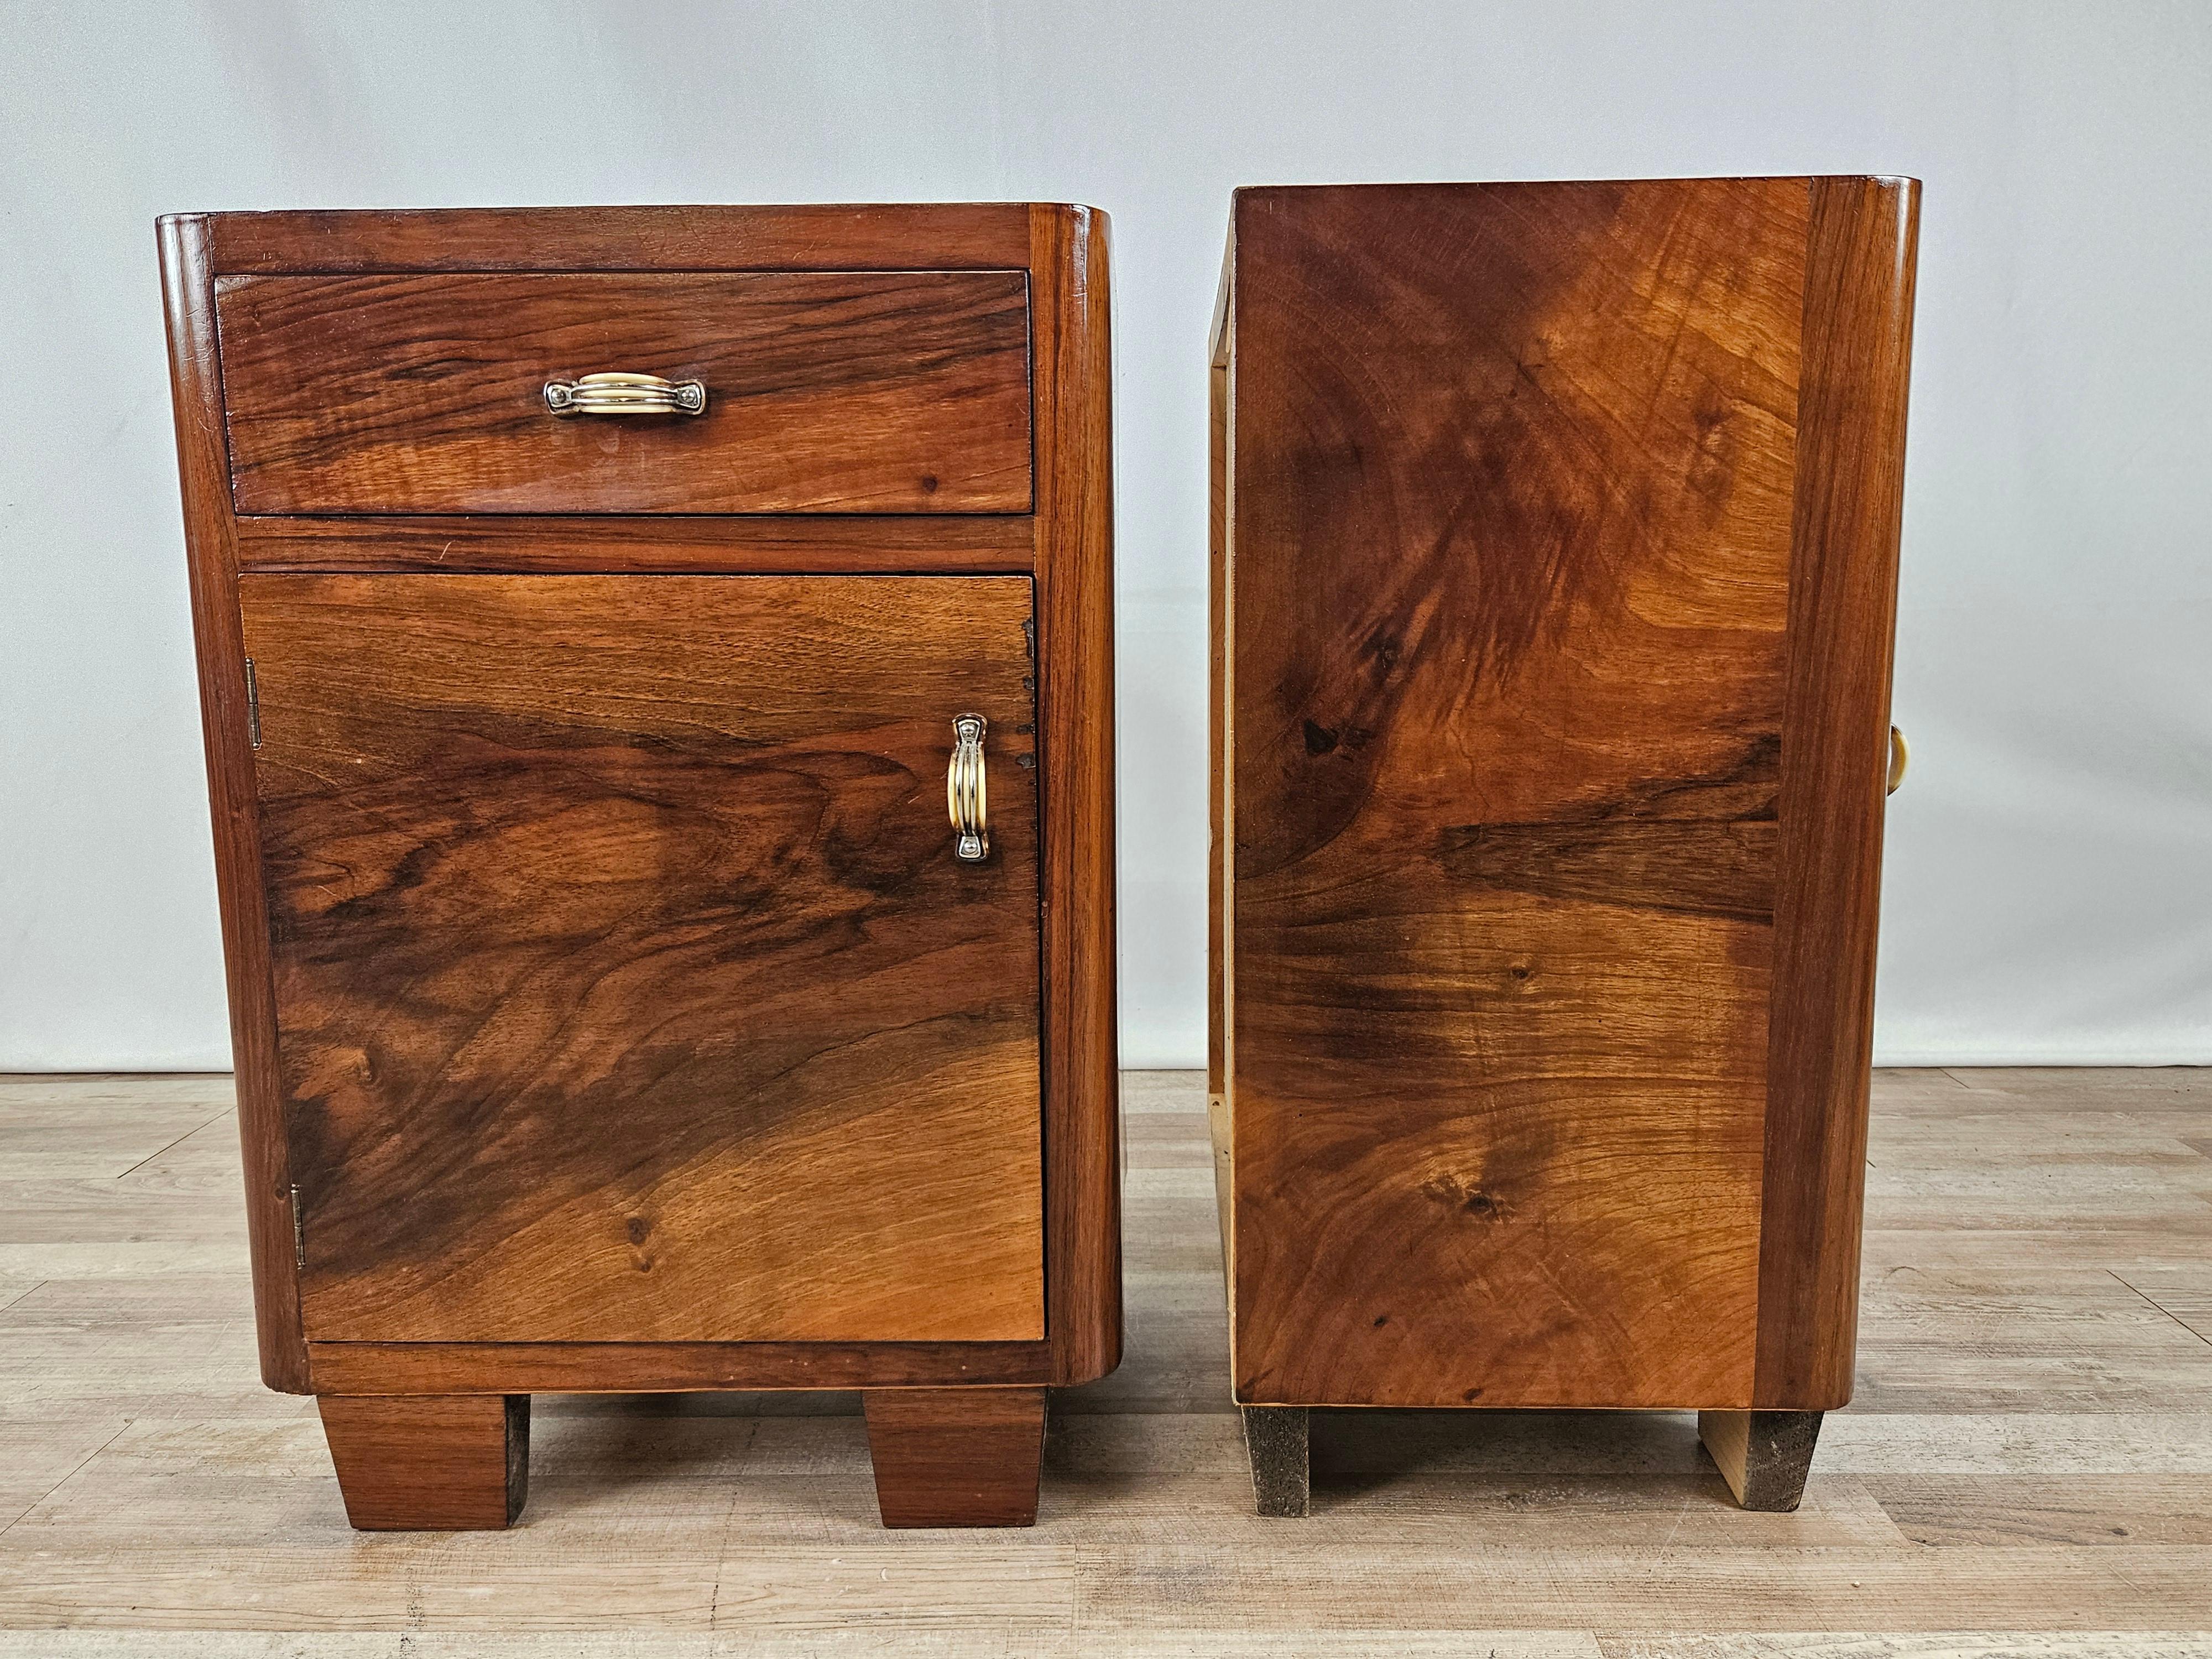 Early 1940s room nightstands in Deco style with door and drawer.

Very distinctive and designer handles.

The nightstands have been oil and shellac polished; they show normal marks due to age and use.
One of the handles of a drawer is damaged